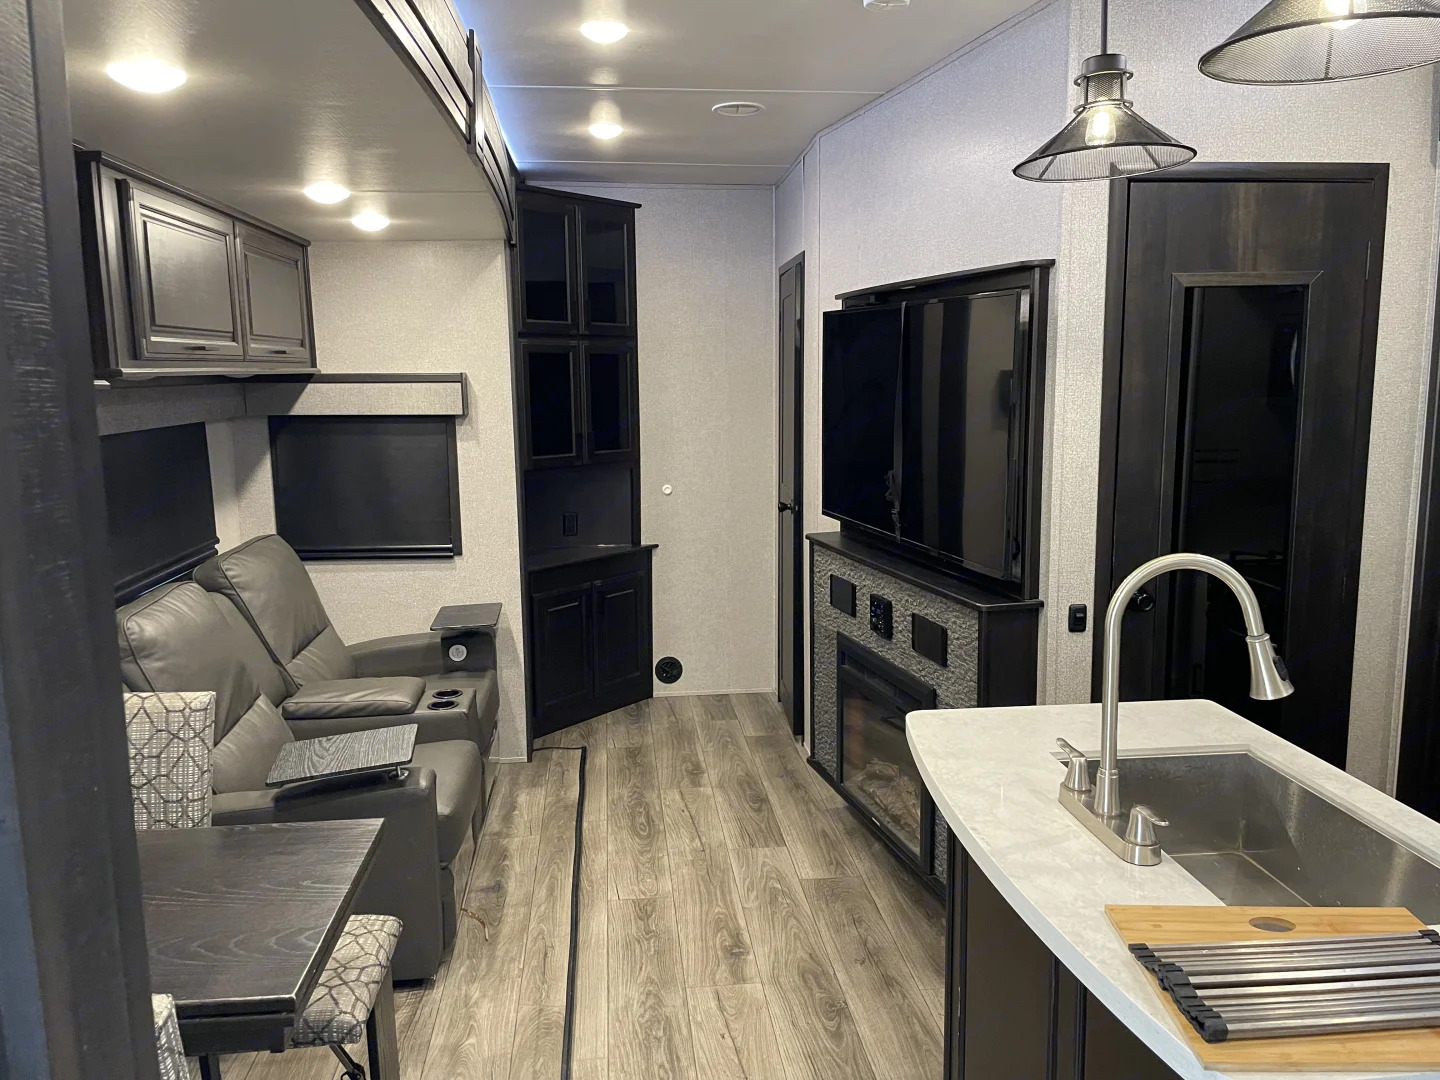 Fifth-wheel Rv for rent near Hot Springs